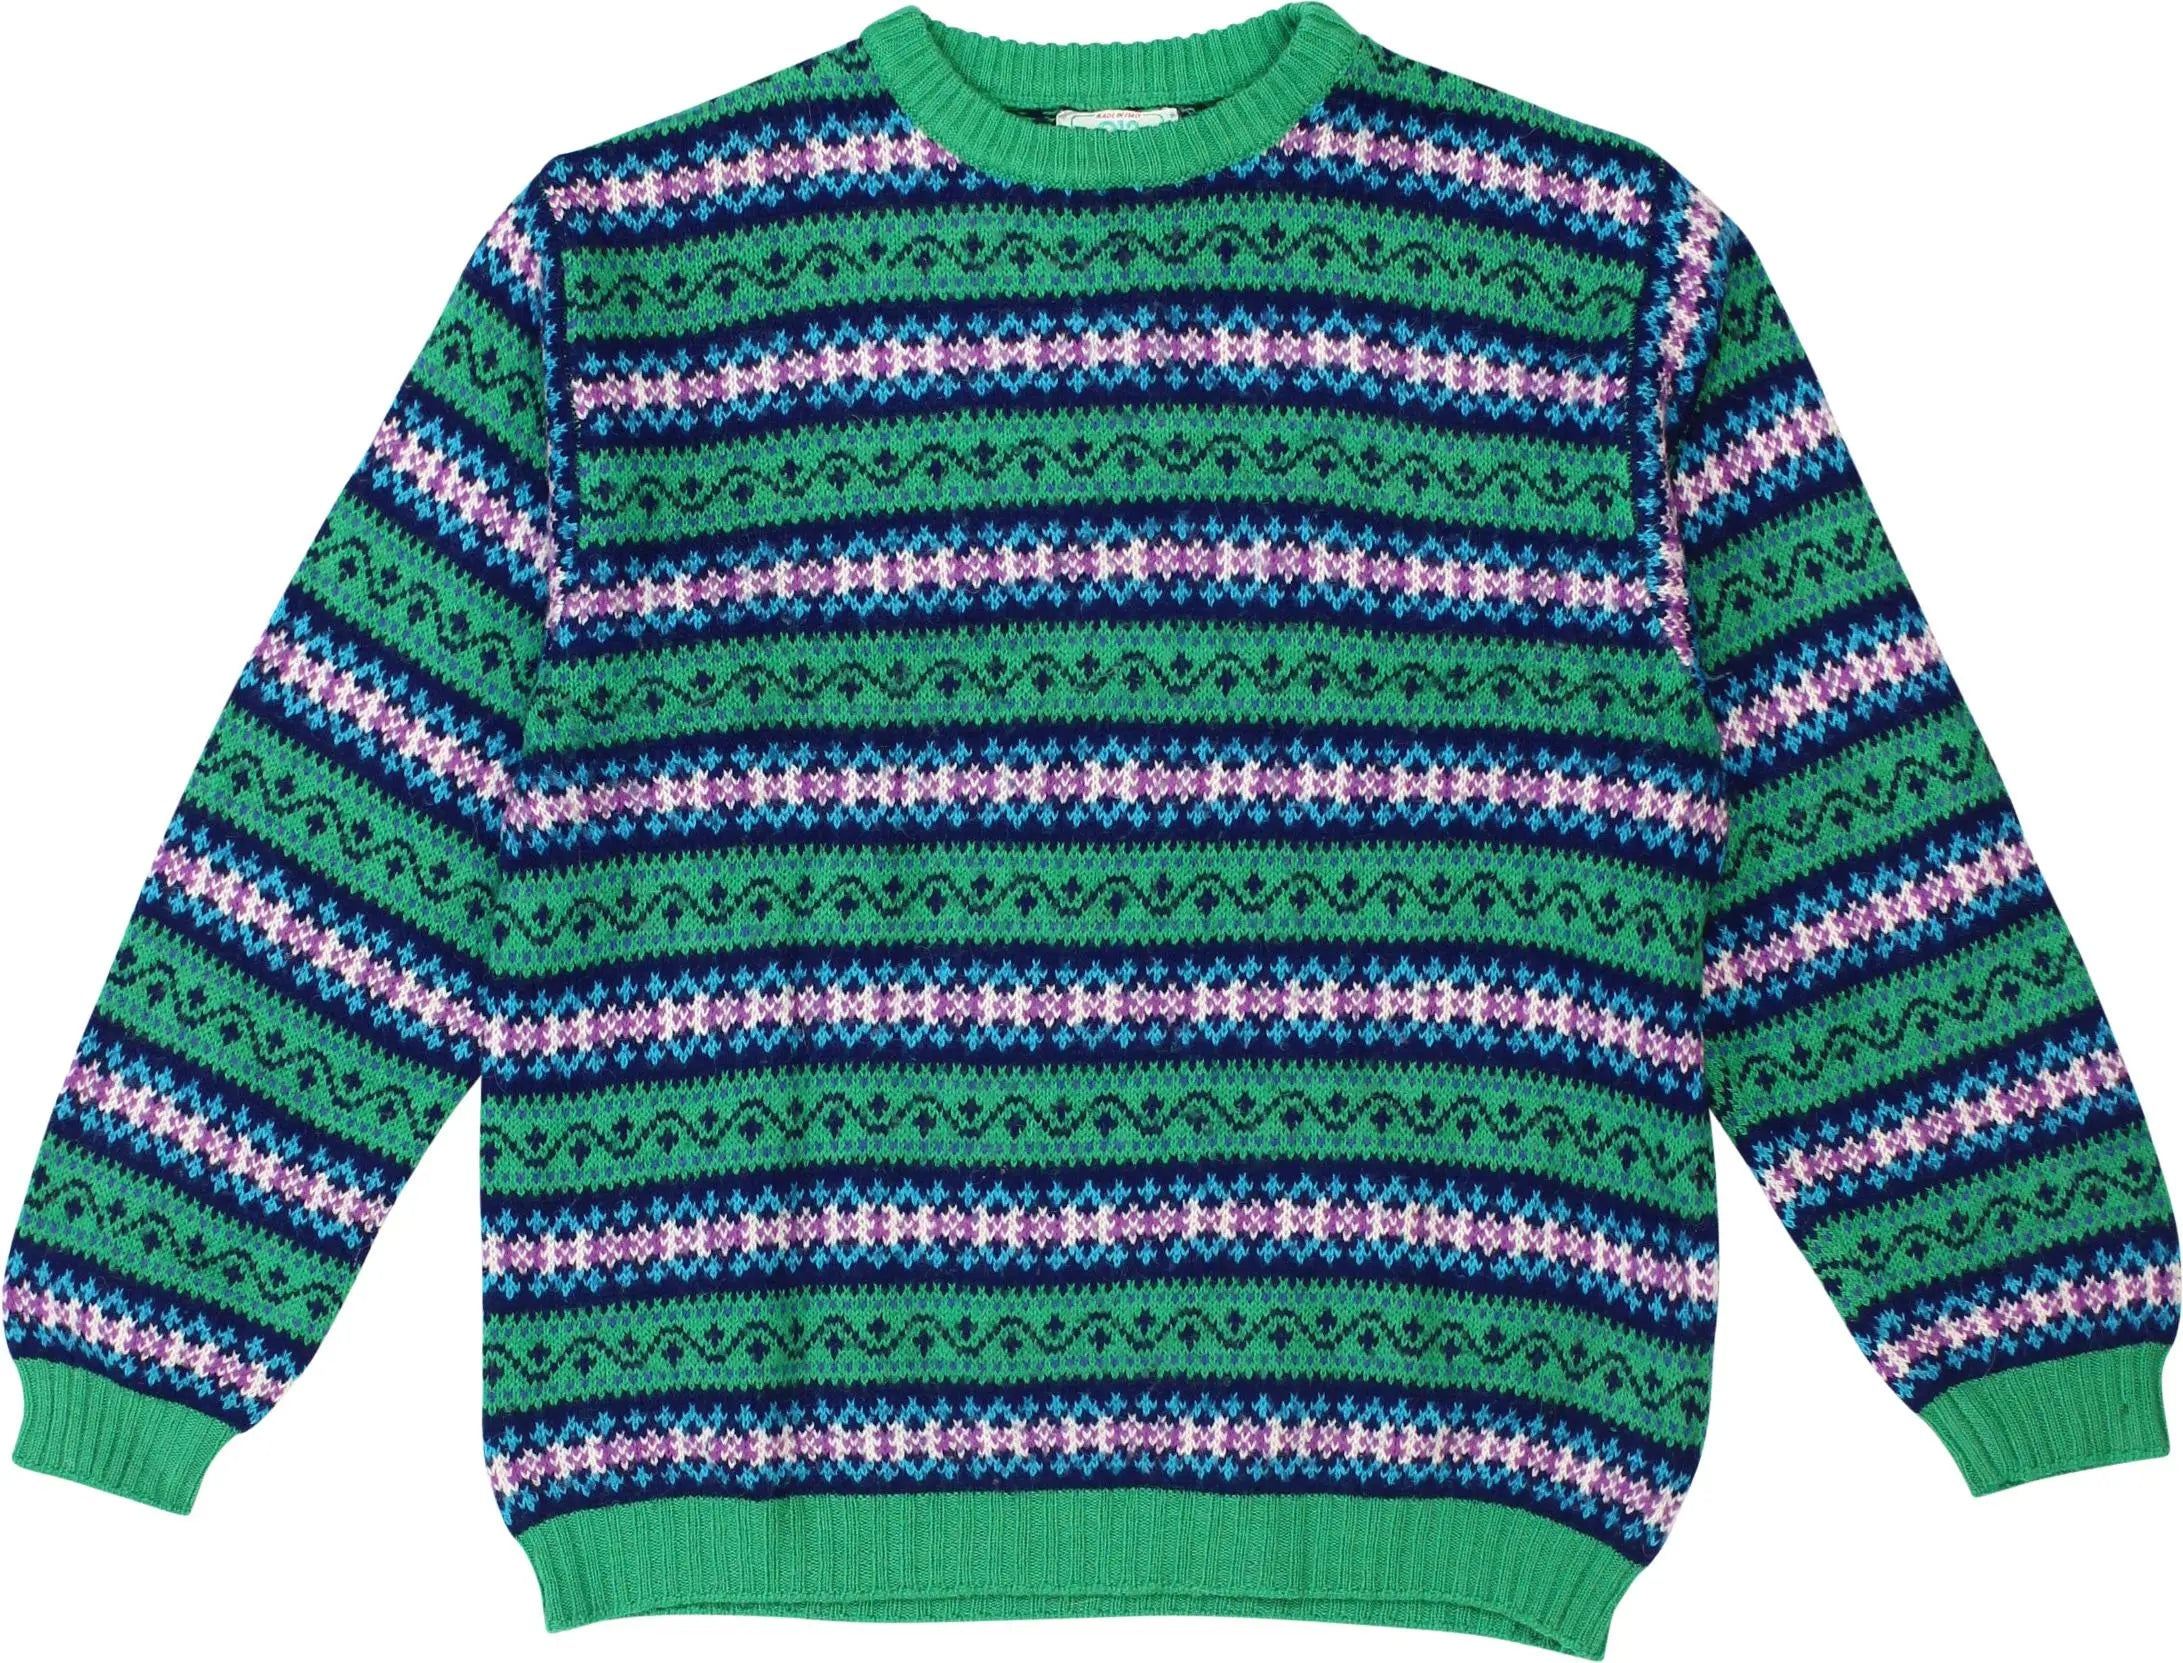 United Colors of Benetton - Colourful Sweater by Benetton- ThriftTale.com - Vintage and second handclothing